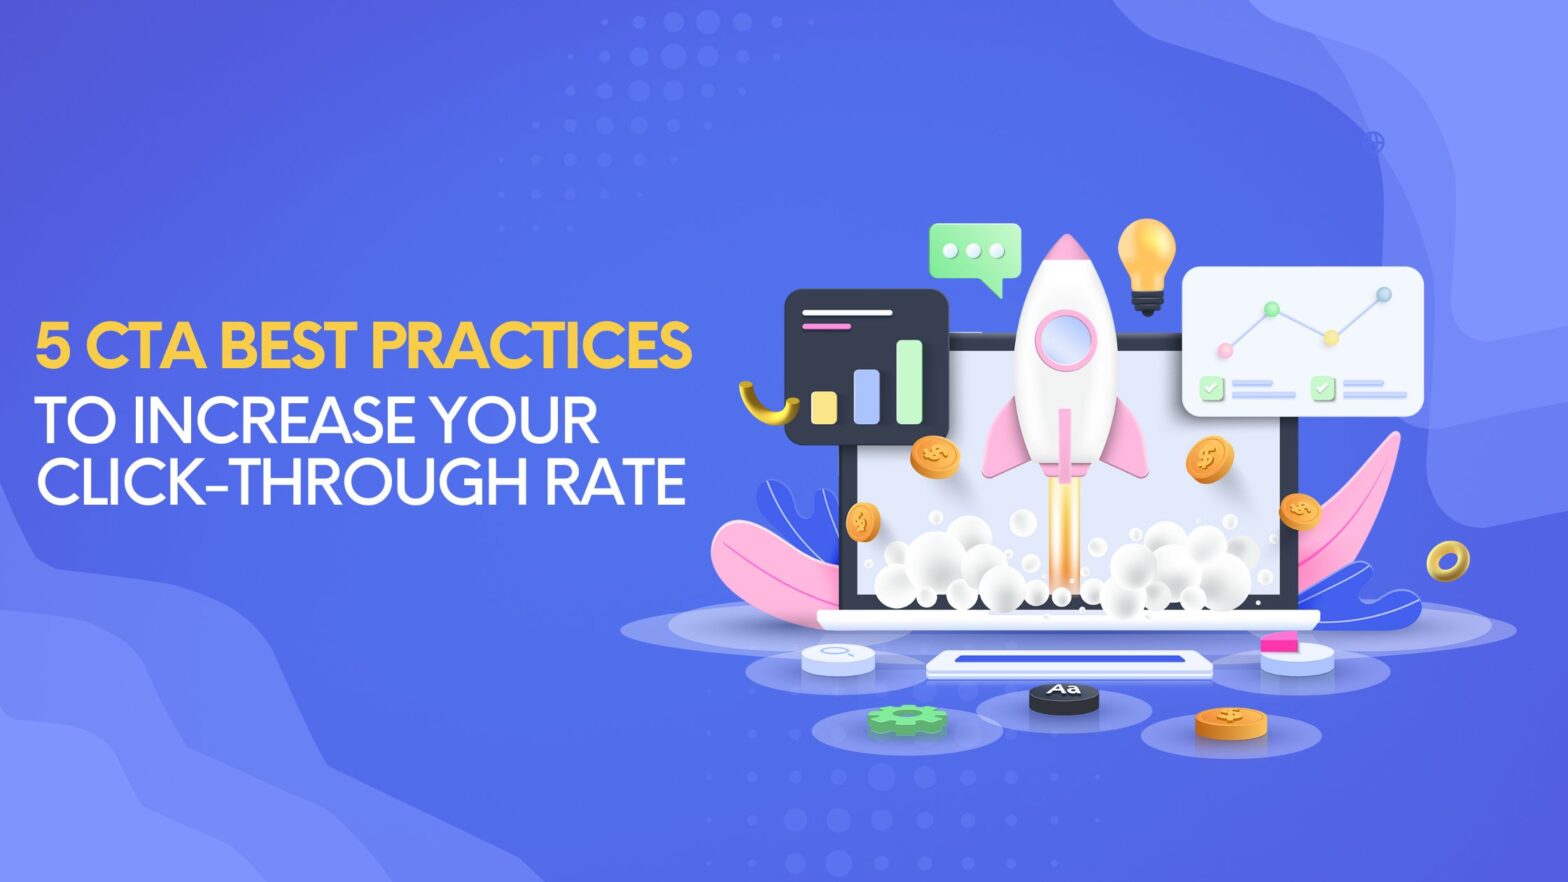 5 CTA BEST PRACTICES TO INCREASE YOUR CLICK-THROUGH RATE